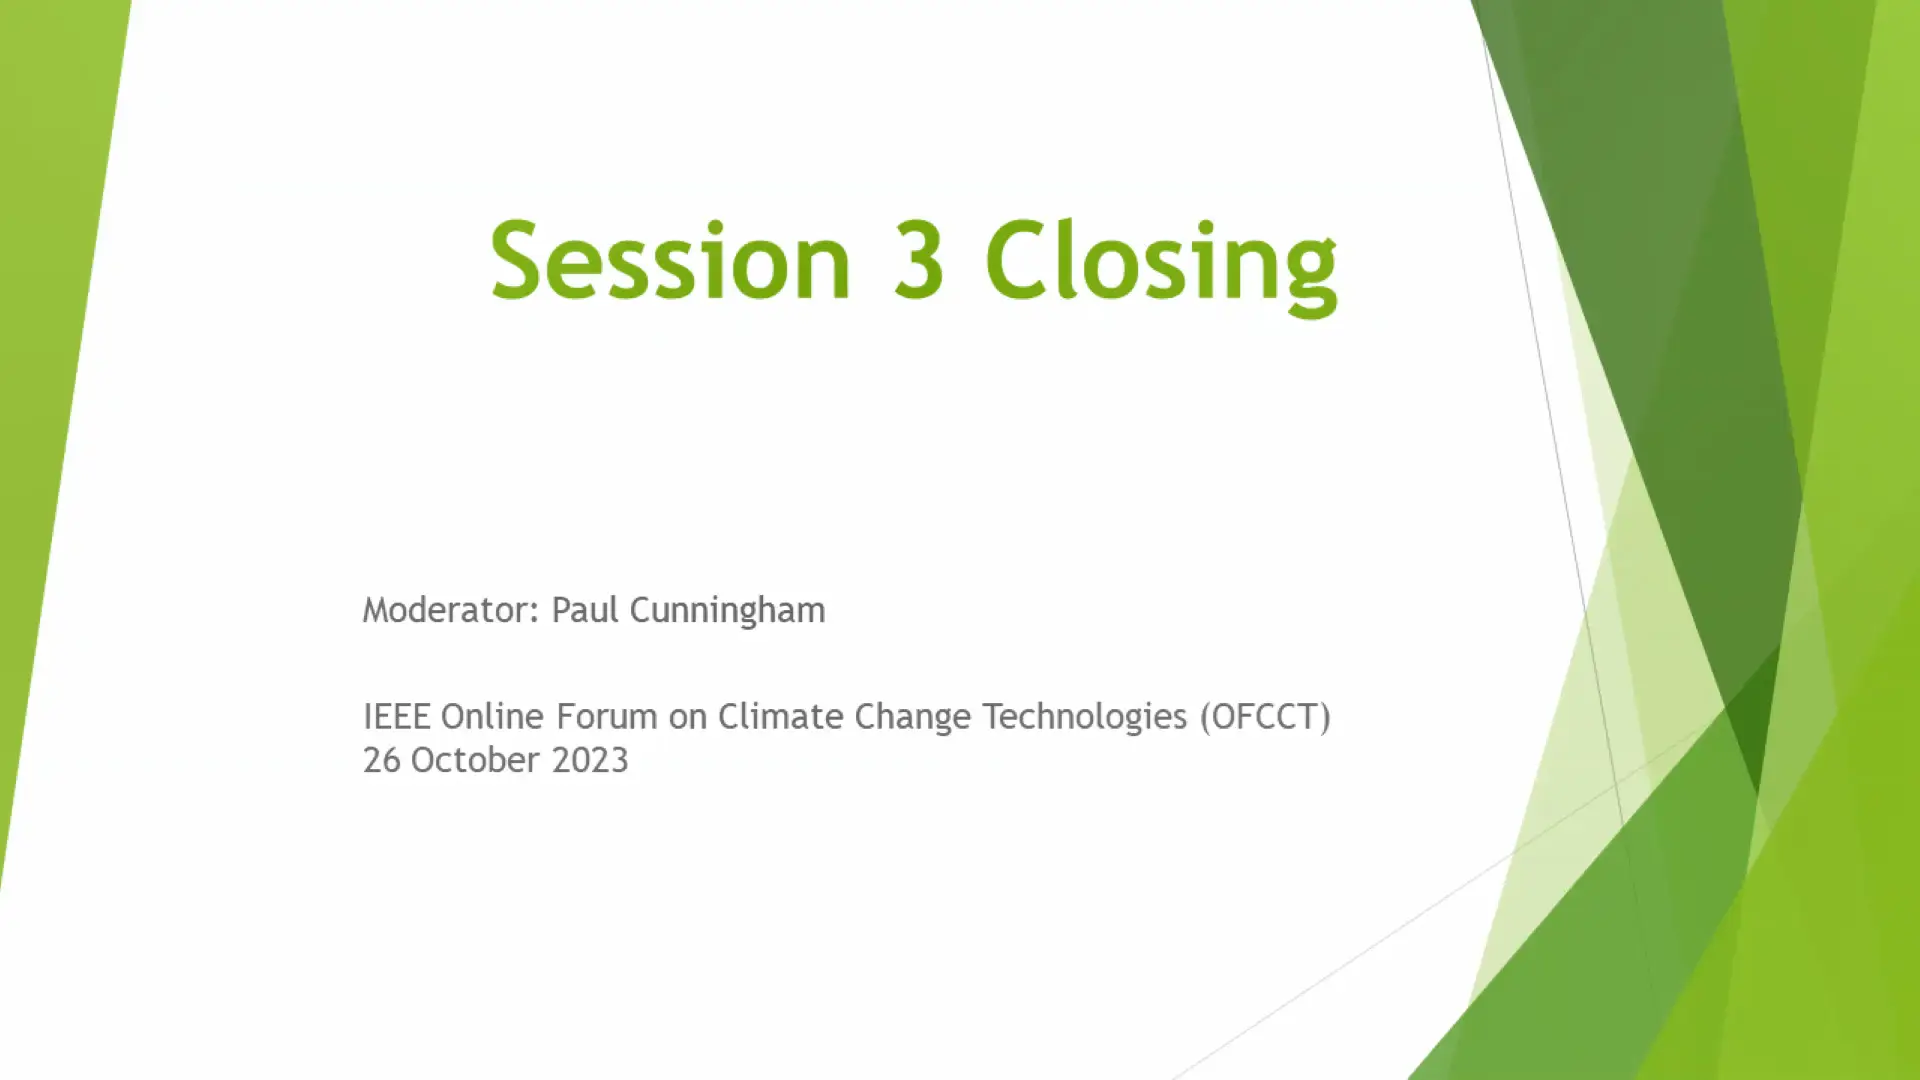 IEEE OFCCT 2023: Session 3 Closing